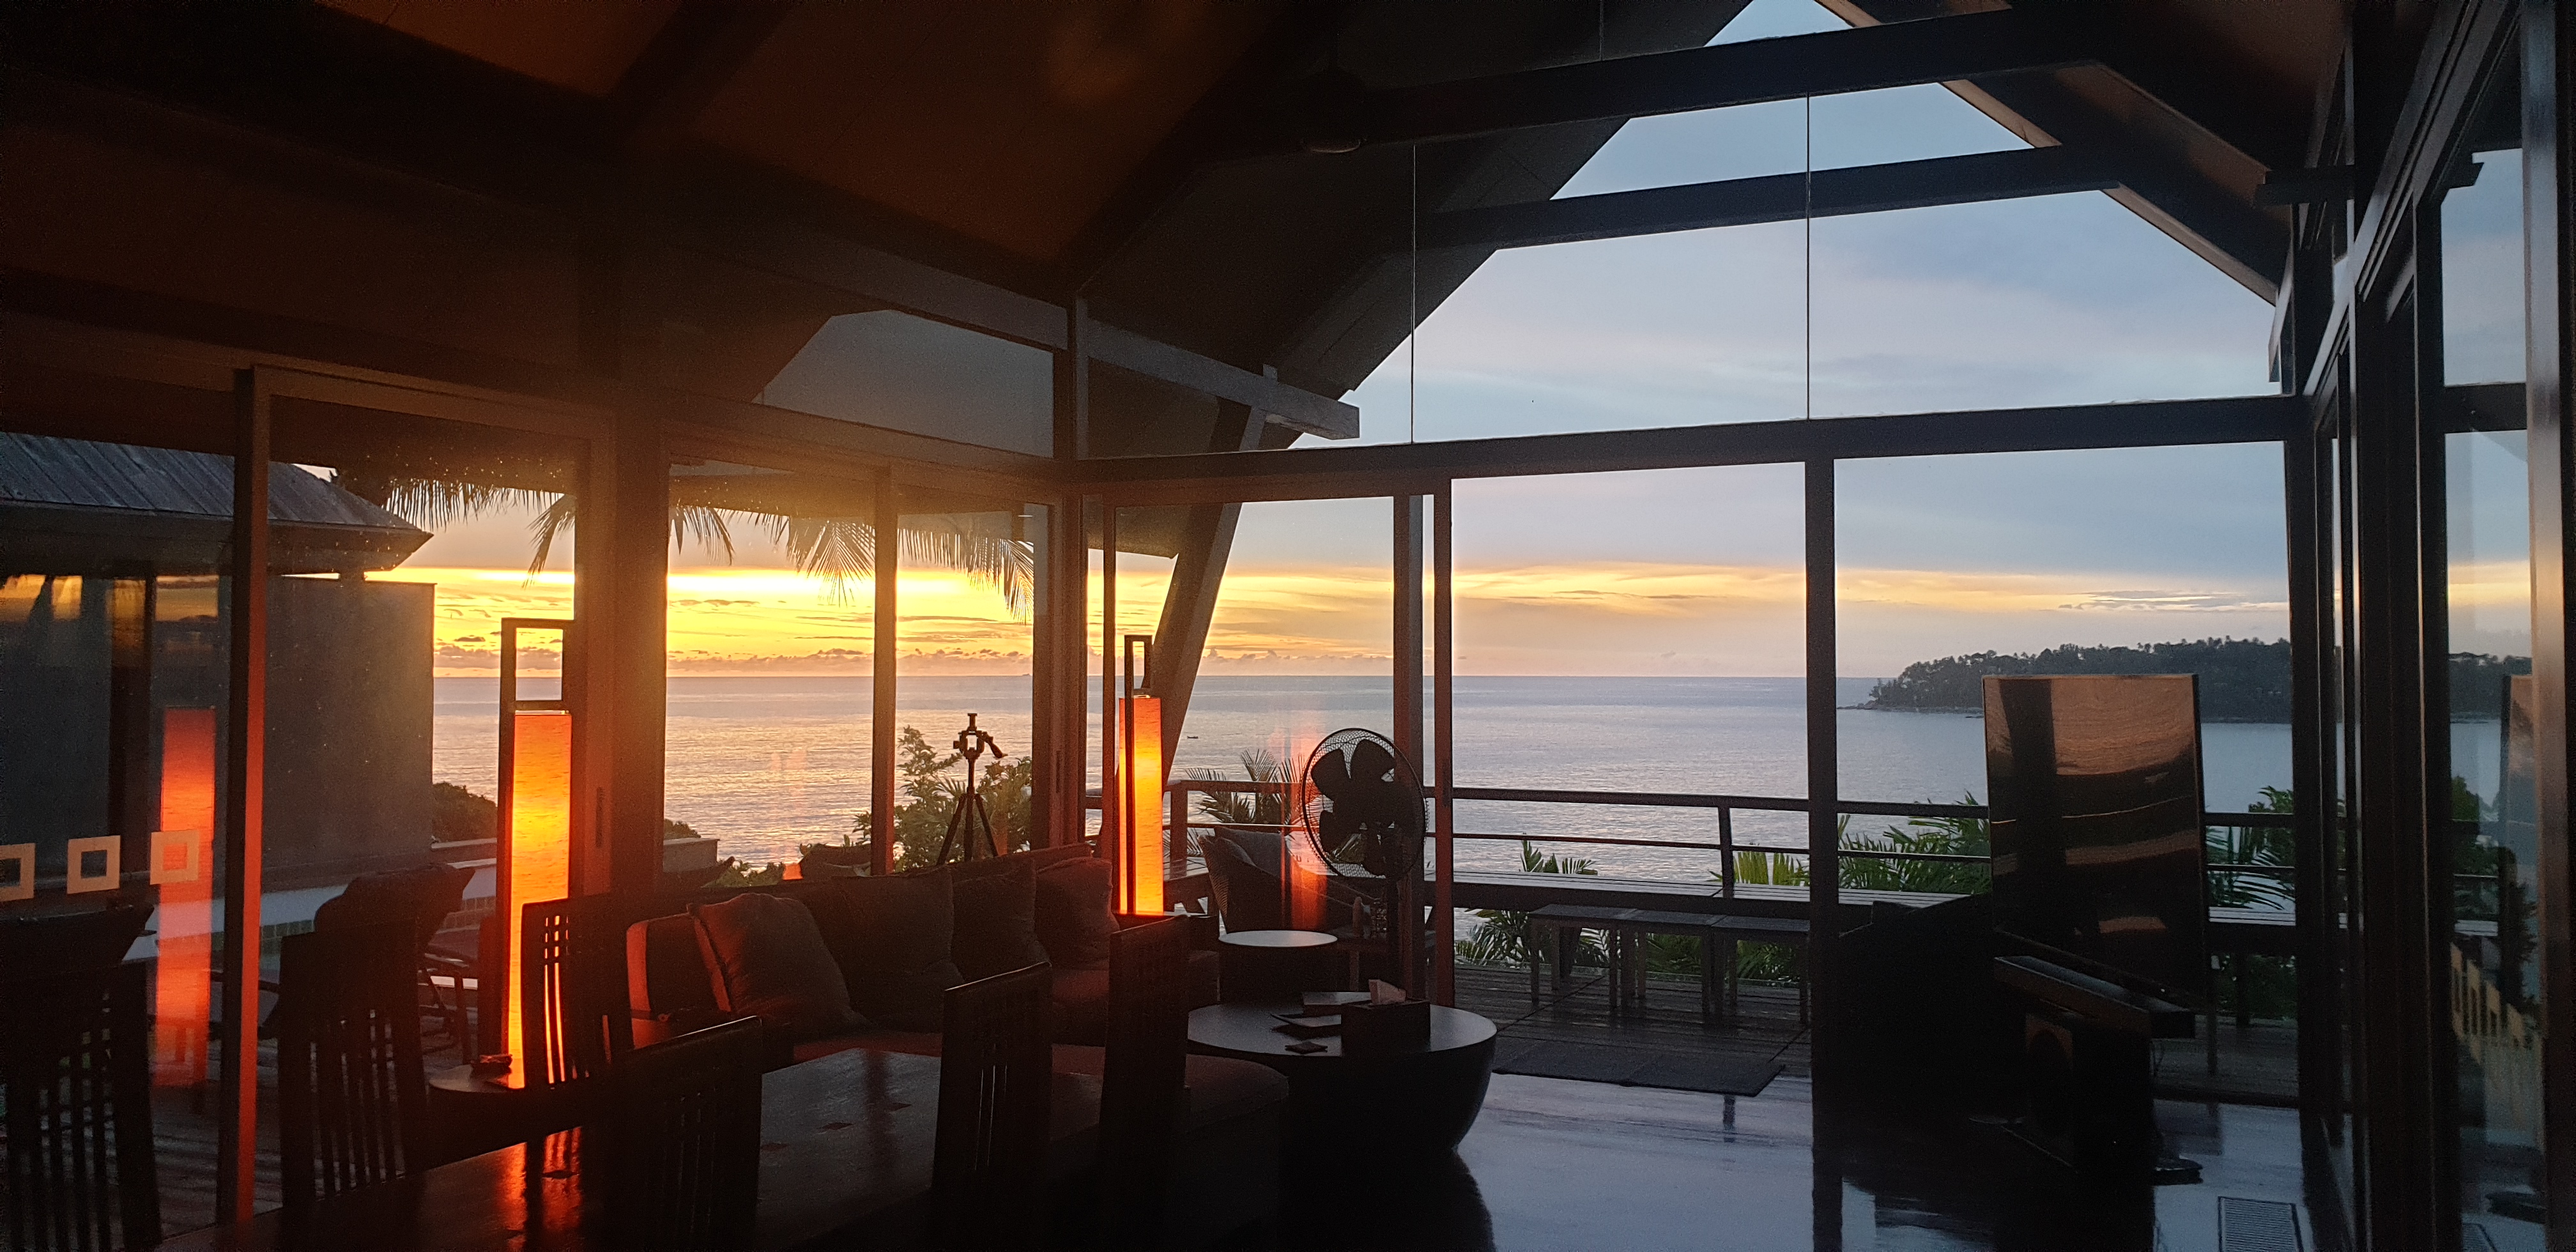 Sunset view from main room